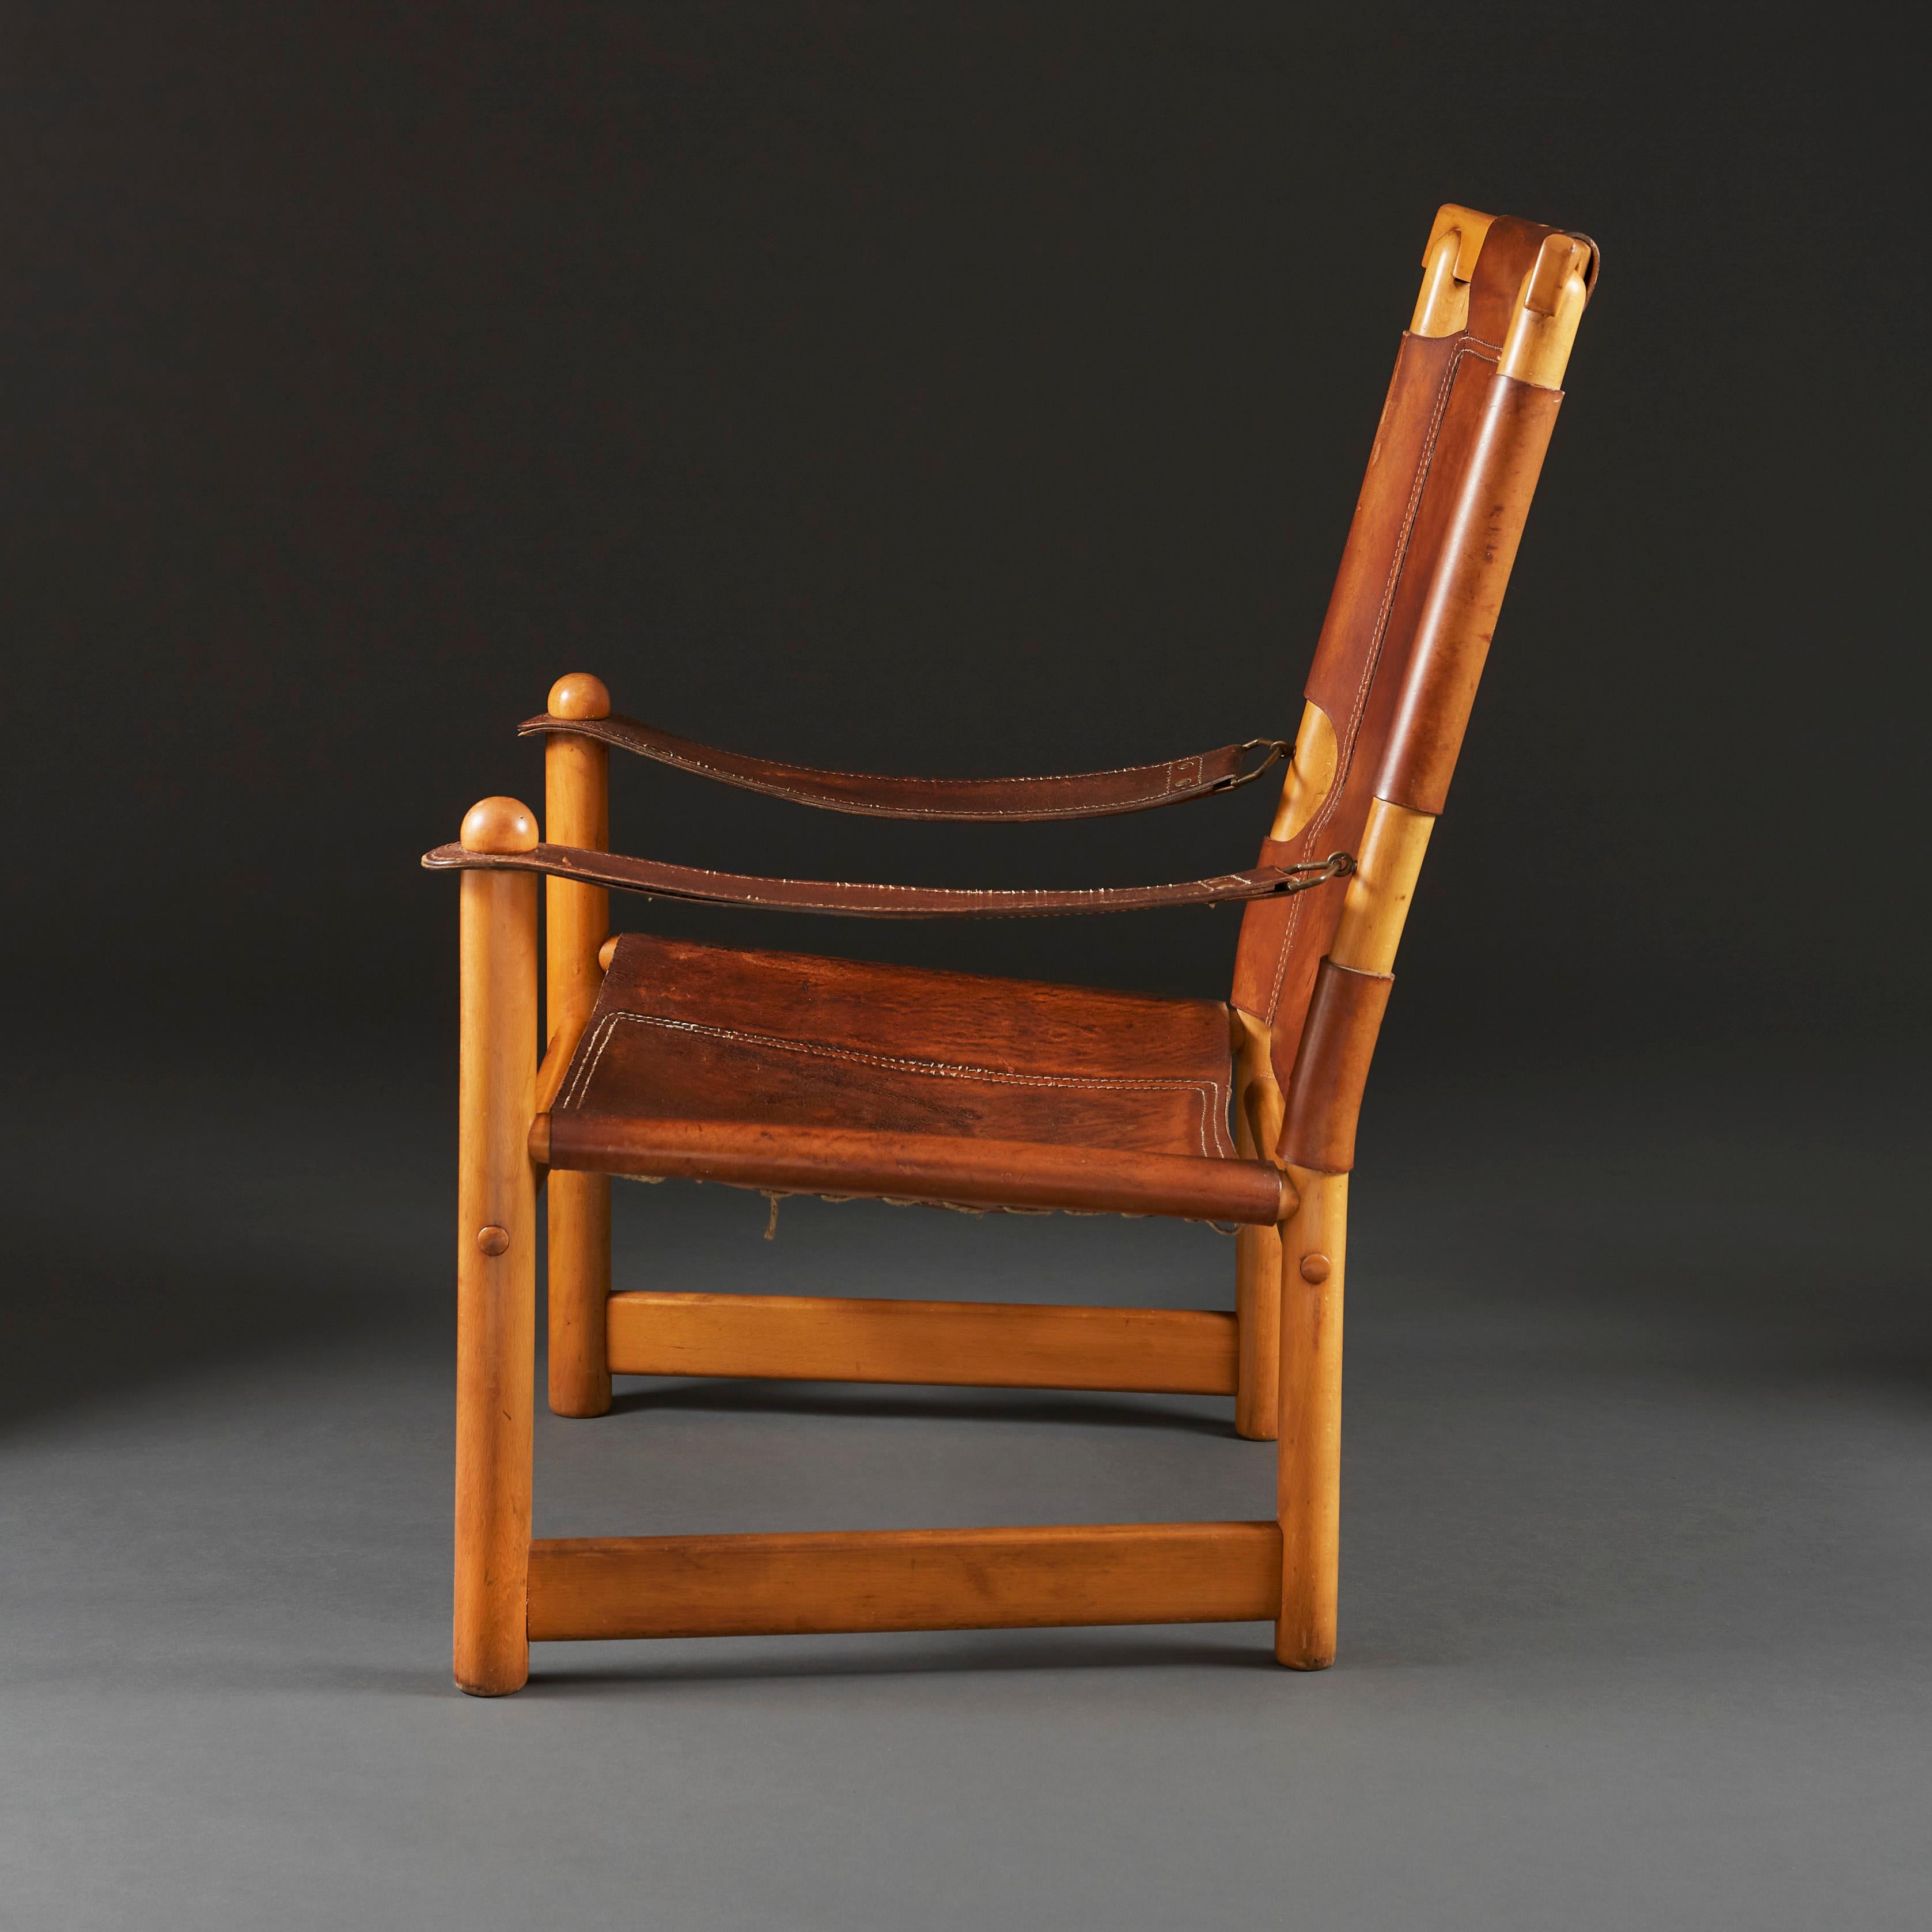 A mid-20th century Italian leather and pine armchair, the original leather showing wonderful patination, the leather stitched around the frame on the back and the seat, the arms made from leather straps with unusual metal buckle attachment to the